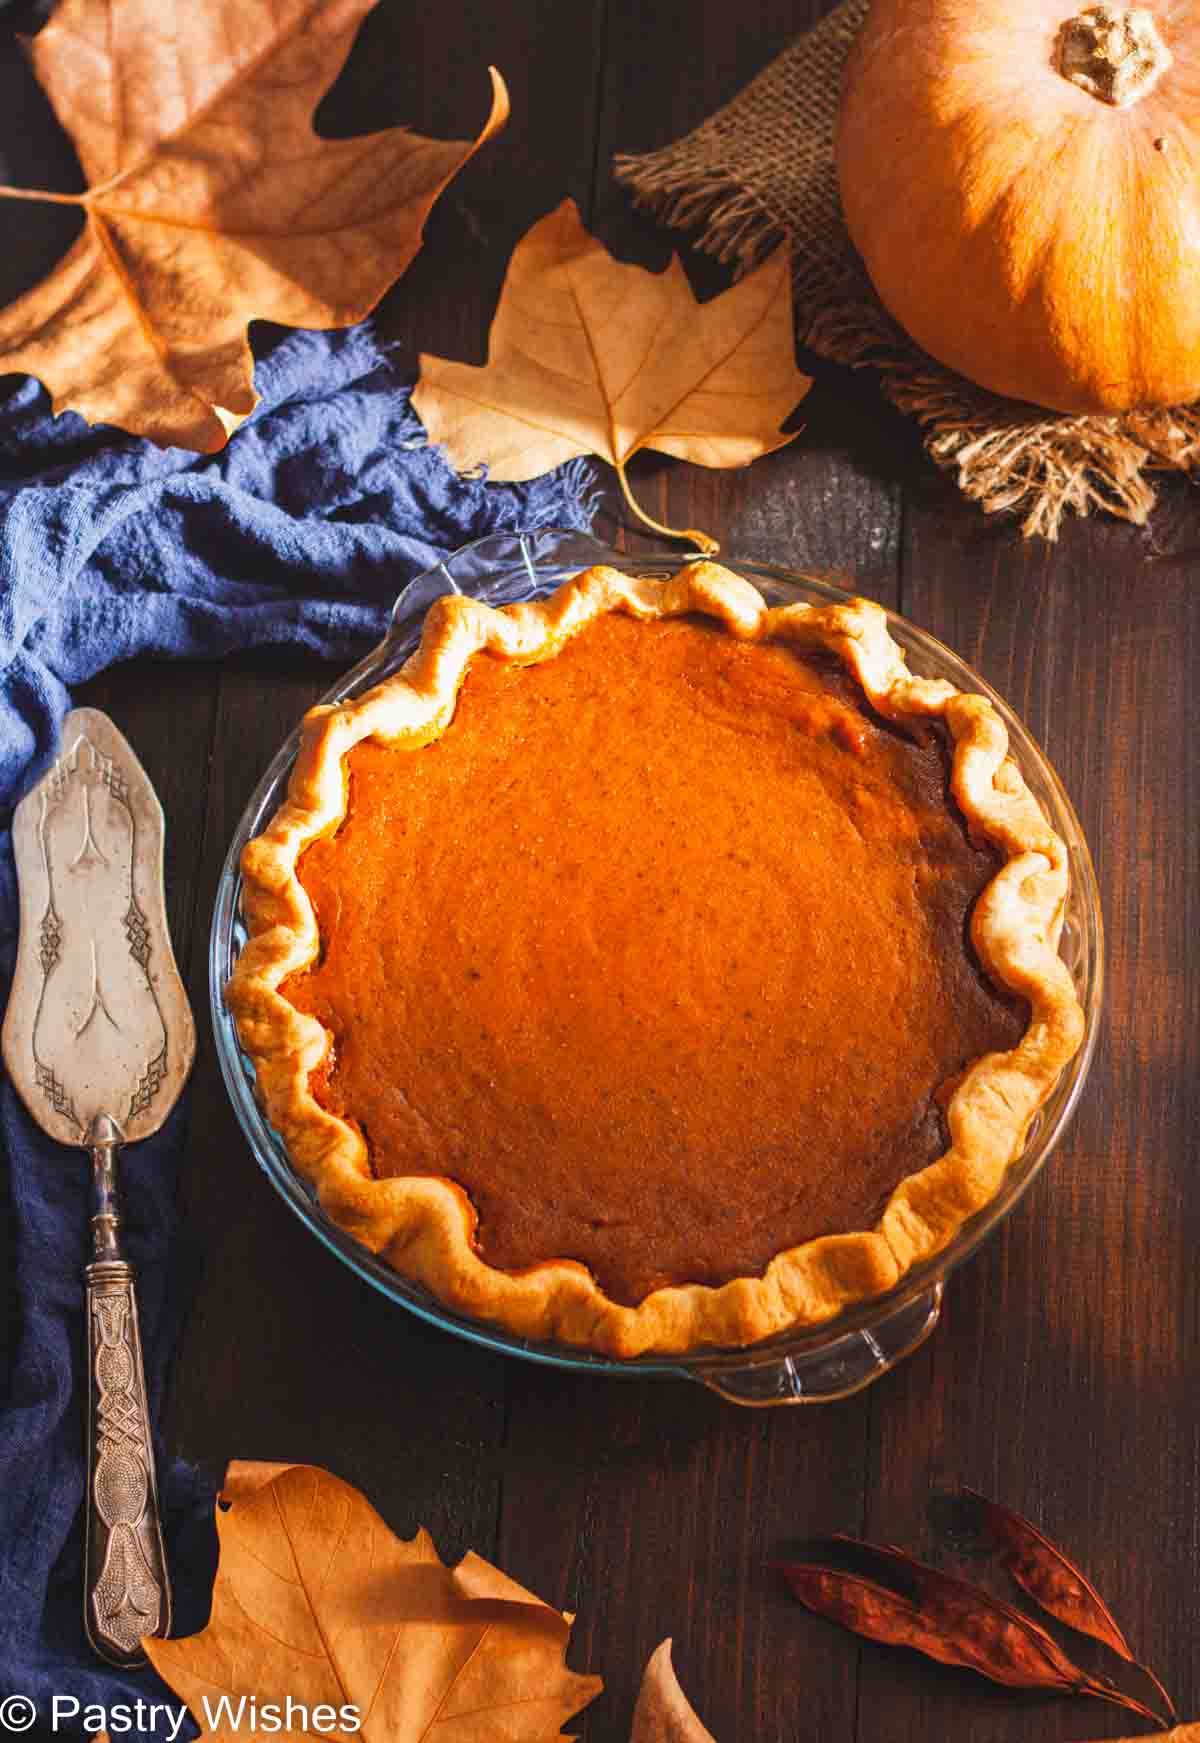 A whole pumpkin pie in a glass pie dish on a wooden surface next to leaves and a pumpkin.